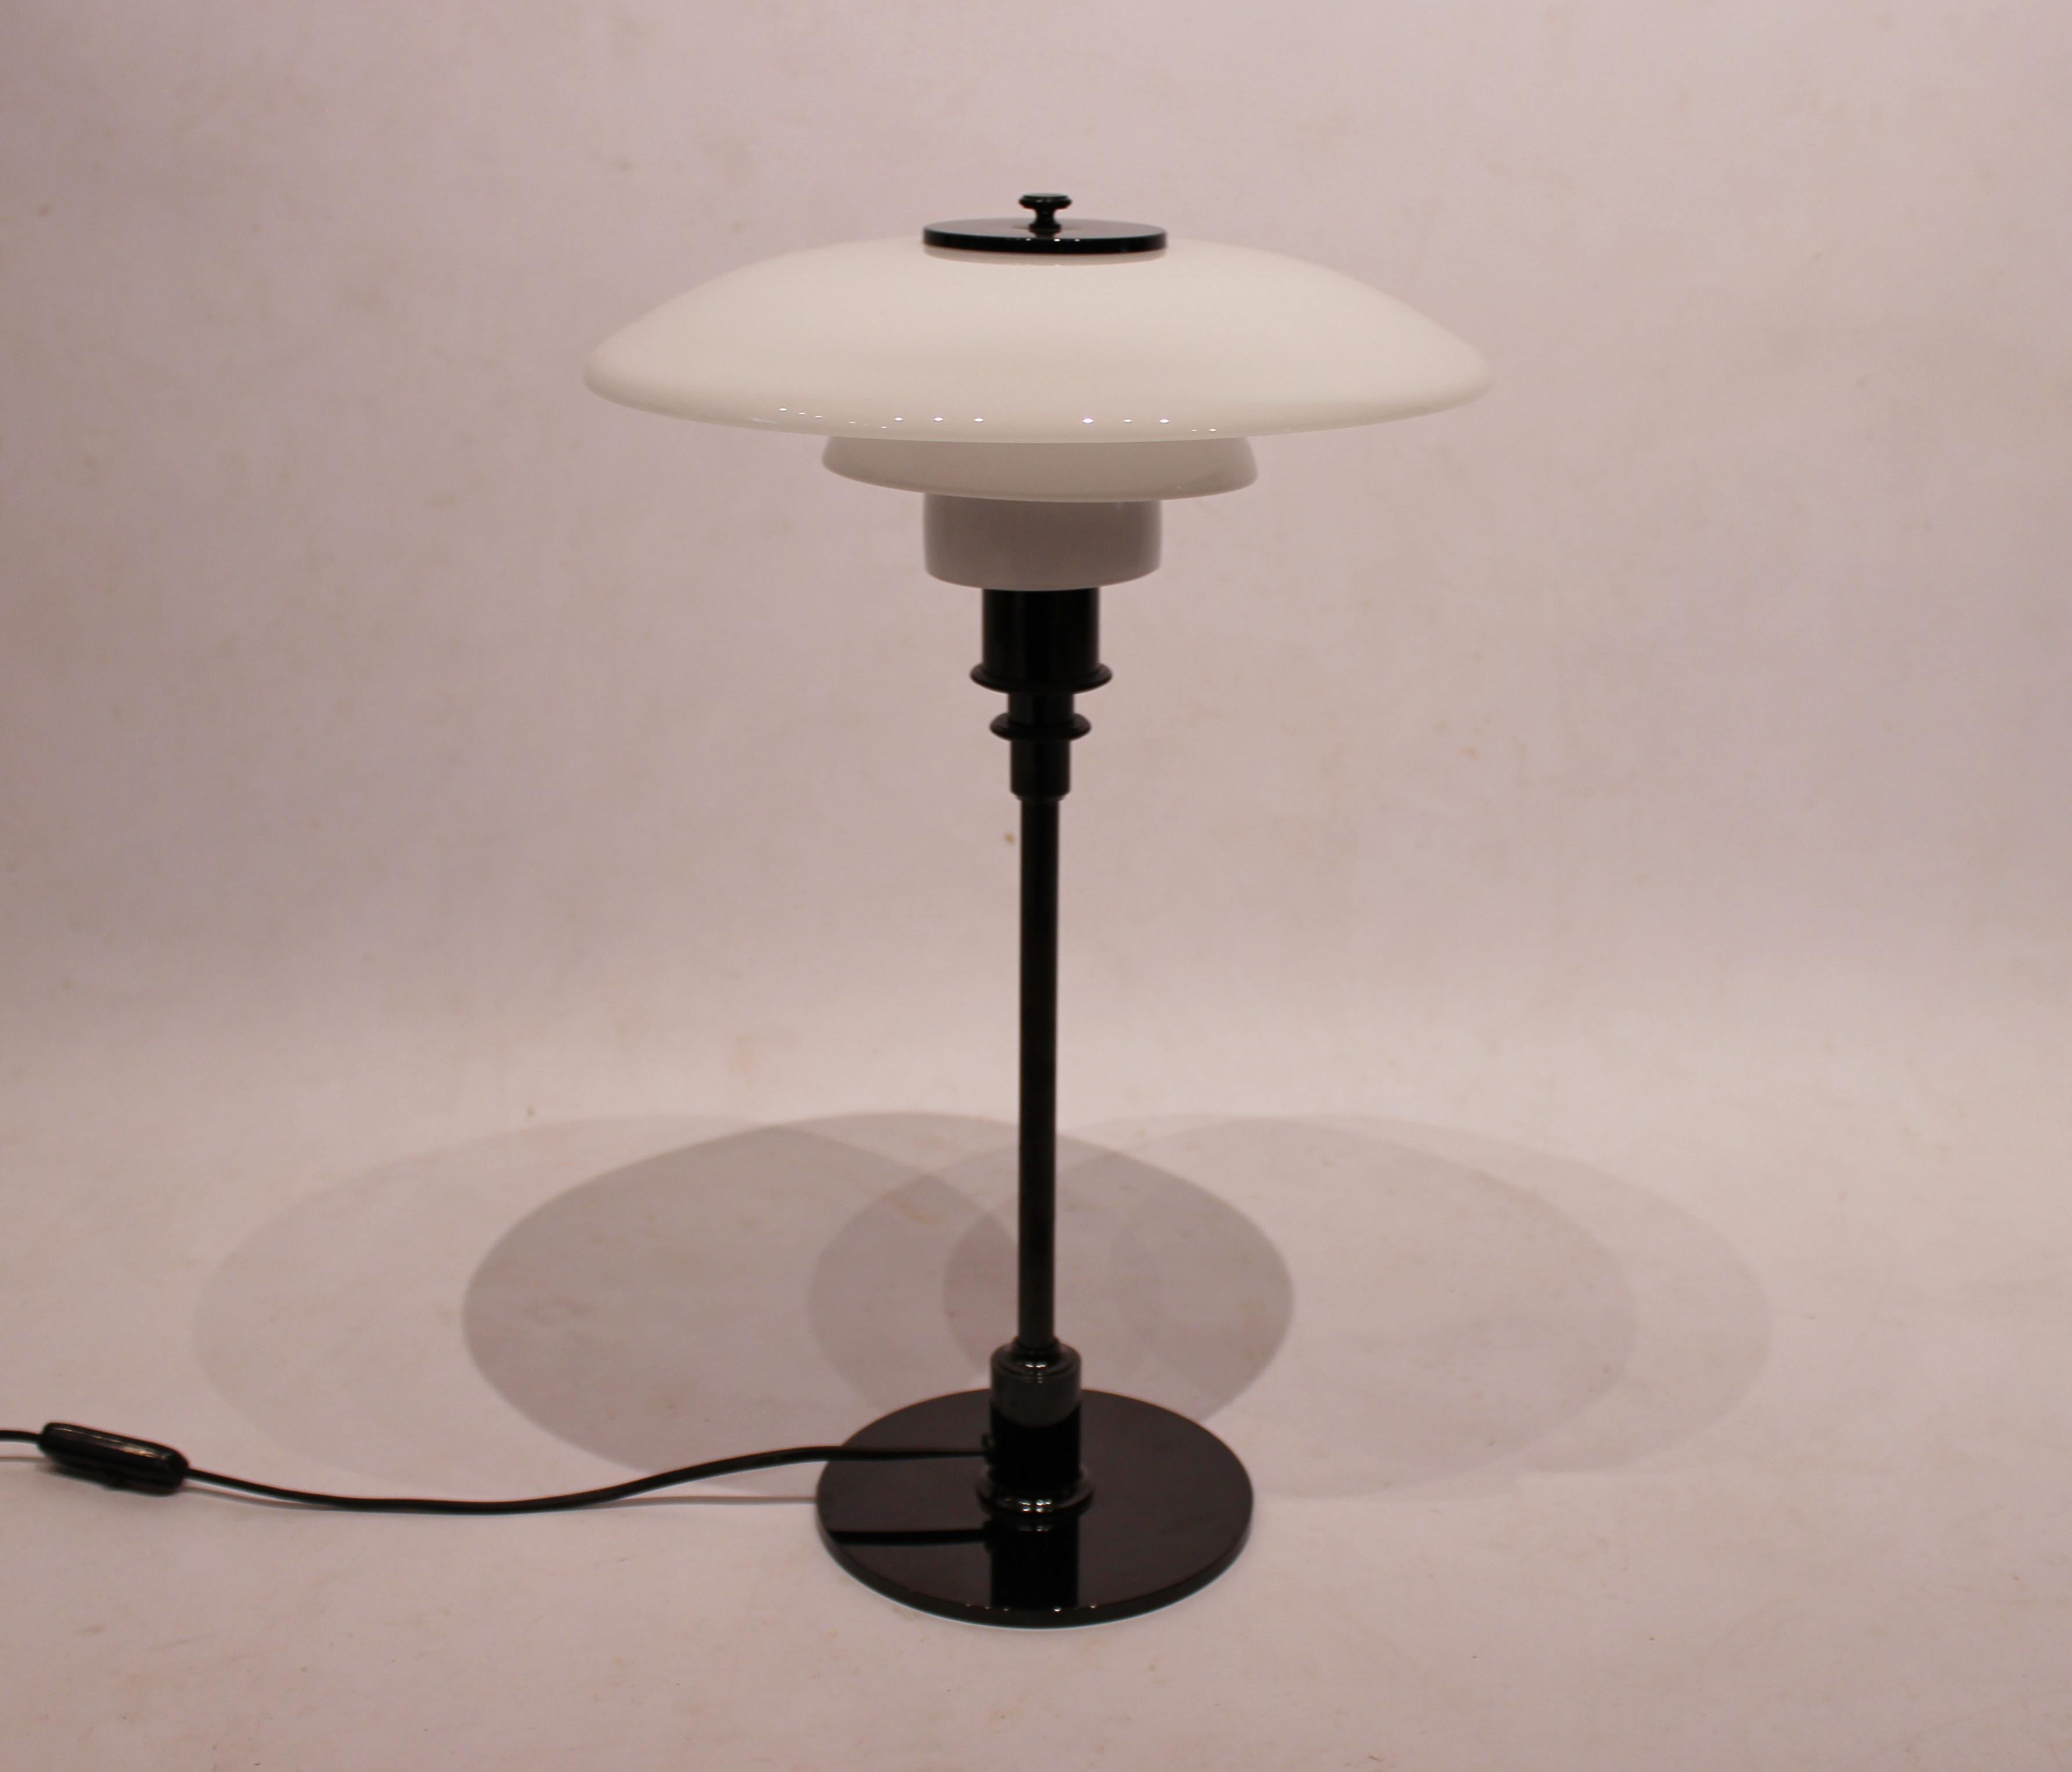 Table lamp, model 3/2, with black frame and opaline glass, designed by Poul Henningsen and manufactured by Louis Poulsen. The lamp is from the 1980s and in great vintage condition.